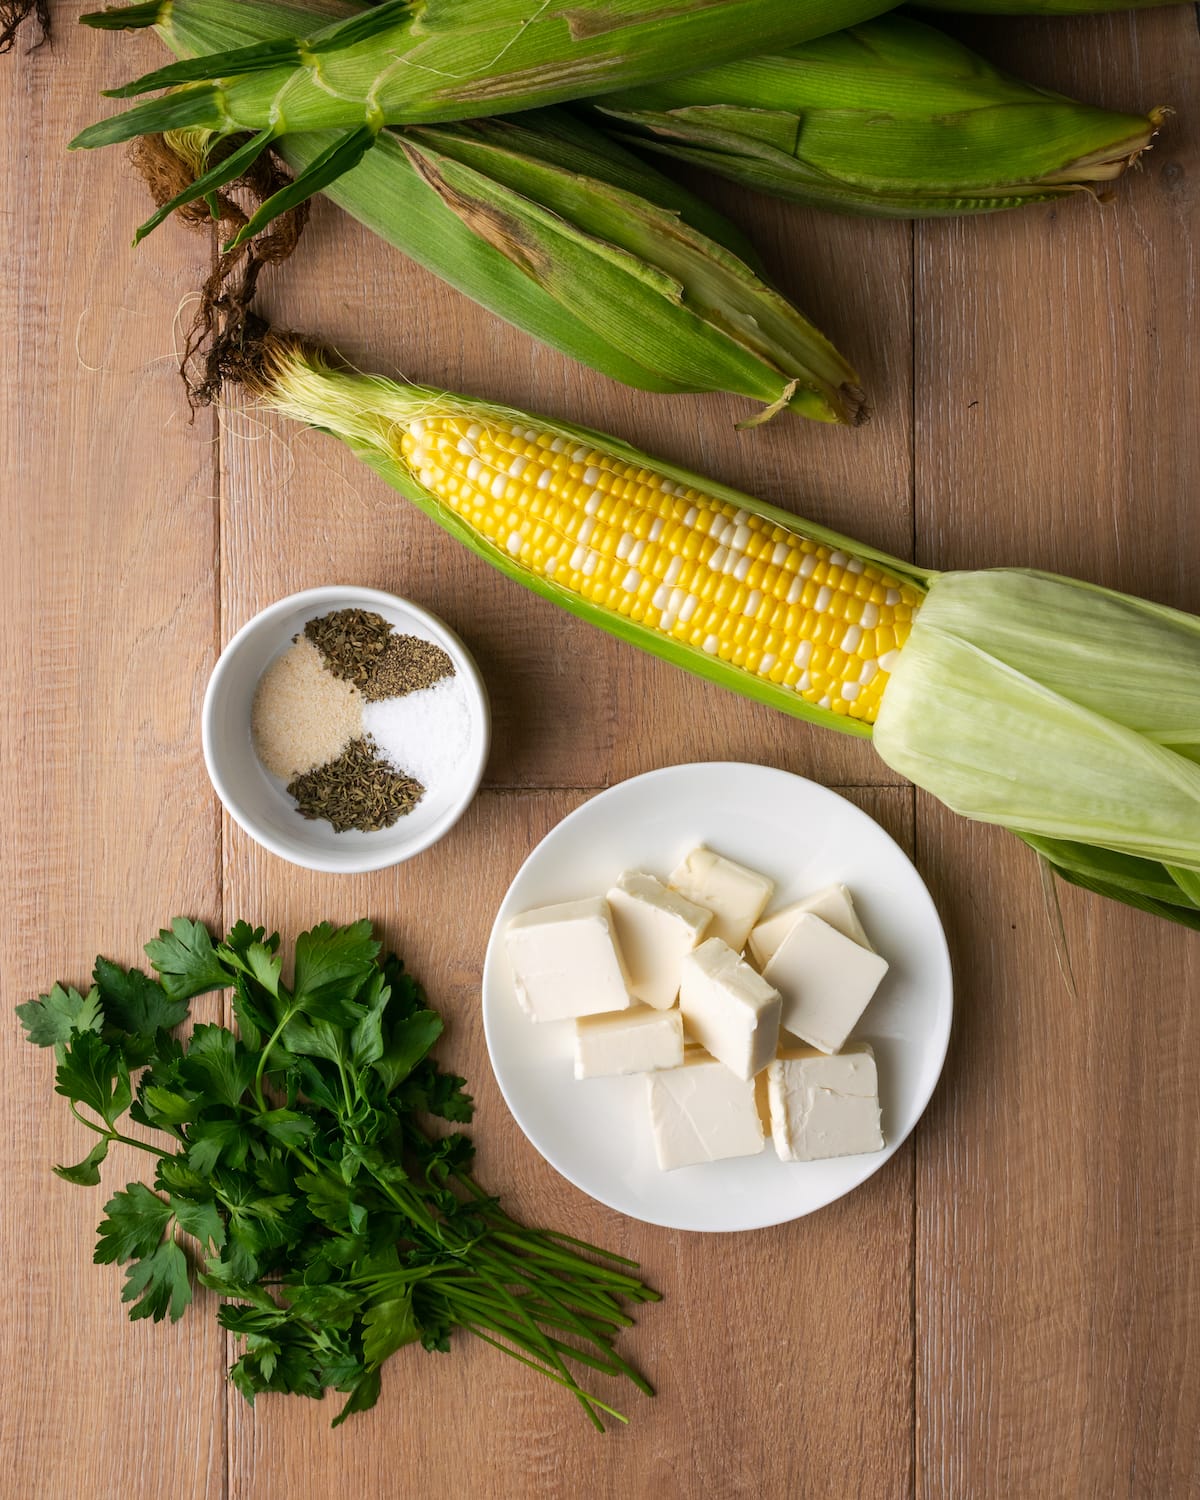 The ingredients for Instant Pot corn on the cob with herb butter.